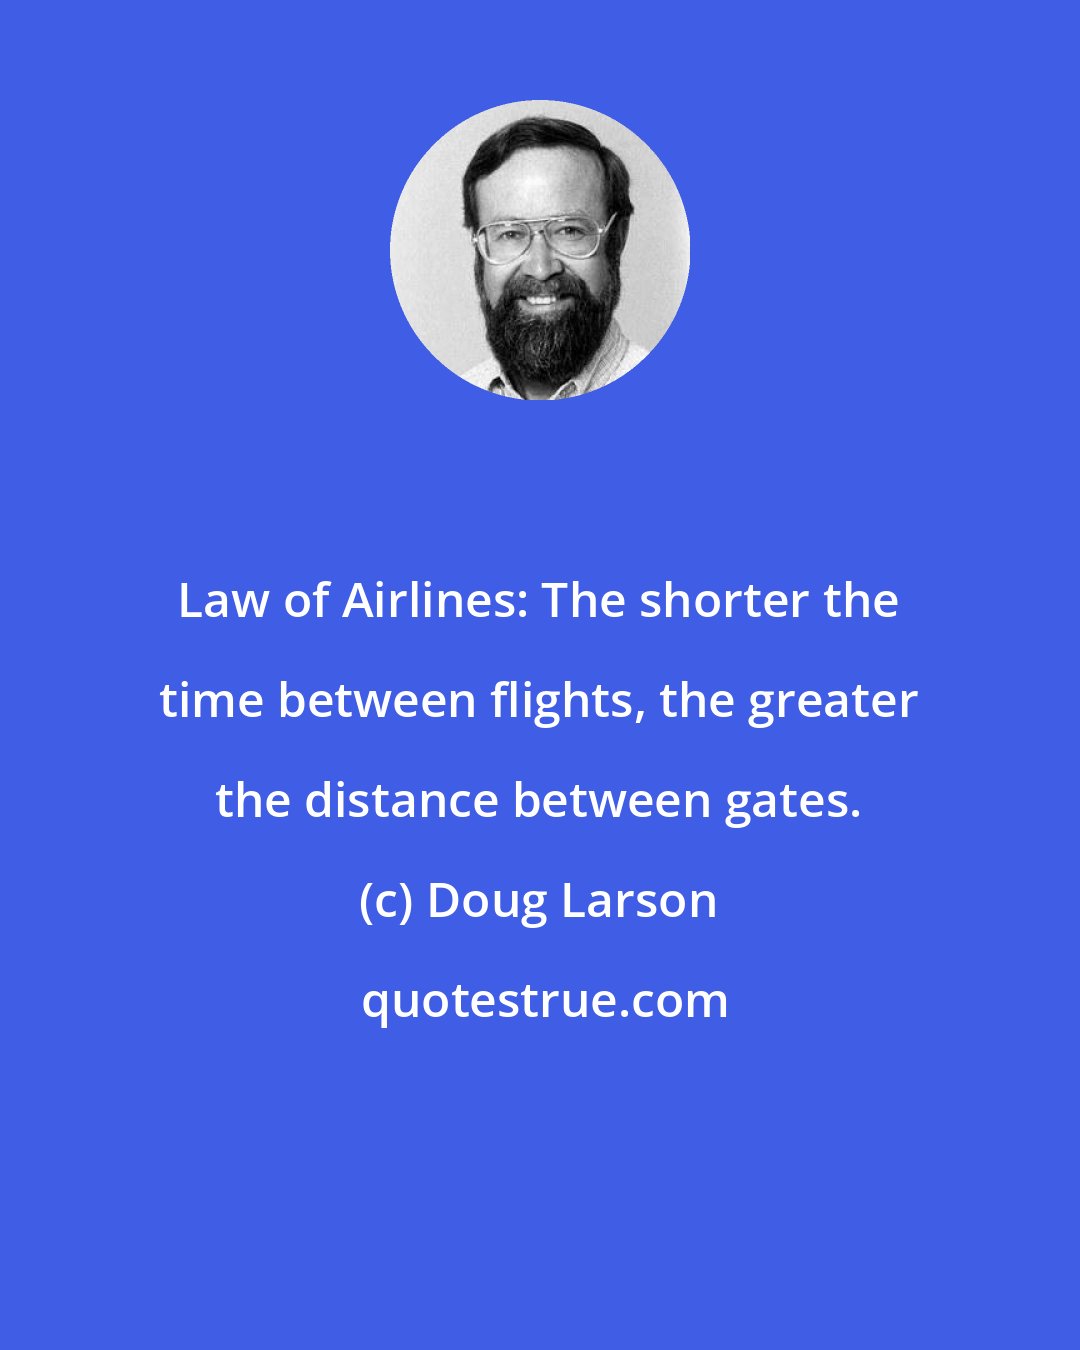 Doug Larson: Law of Airlines: The shorter the time between flights, the greater the distance between gates.